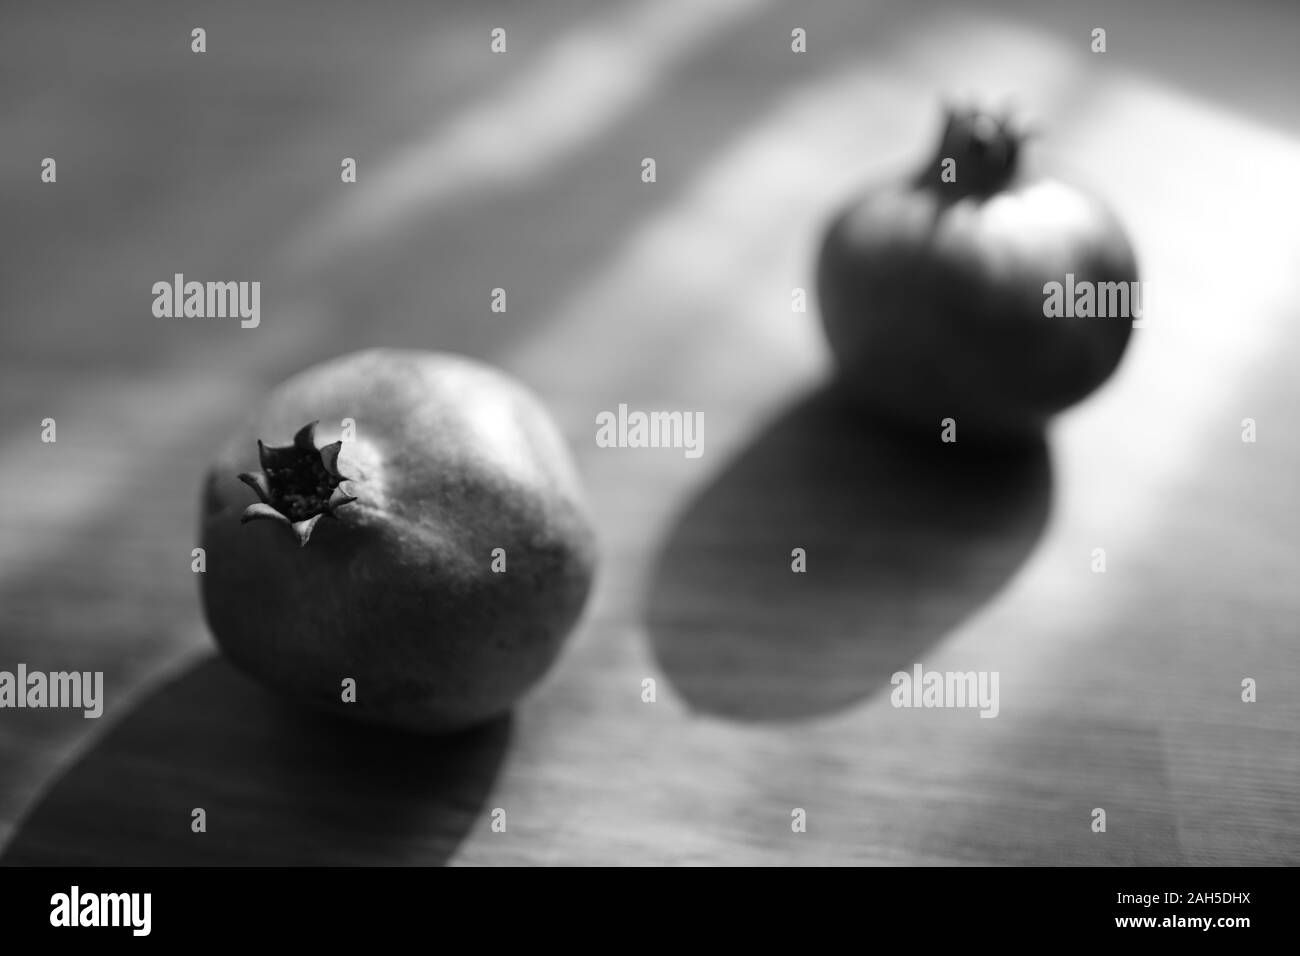 Two whole ripe pomegranate on the wooden sunny table, bw photo. Stock Photo